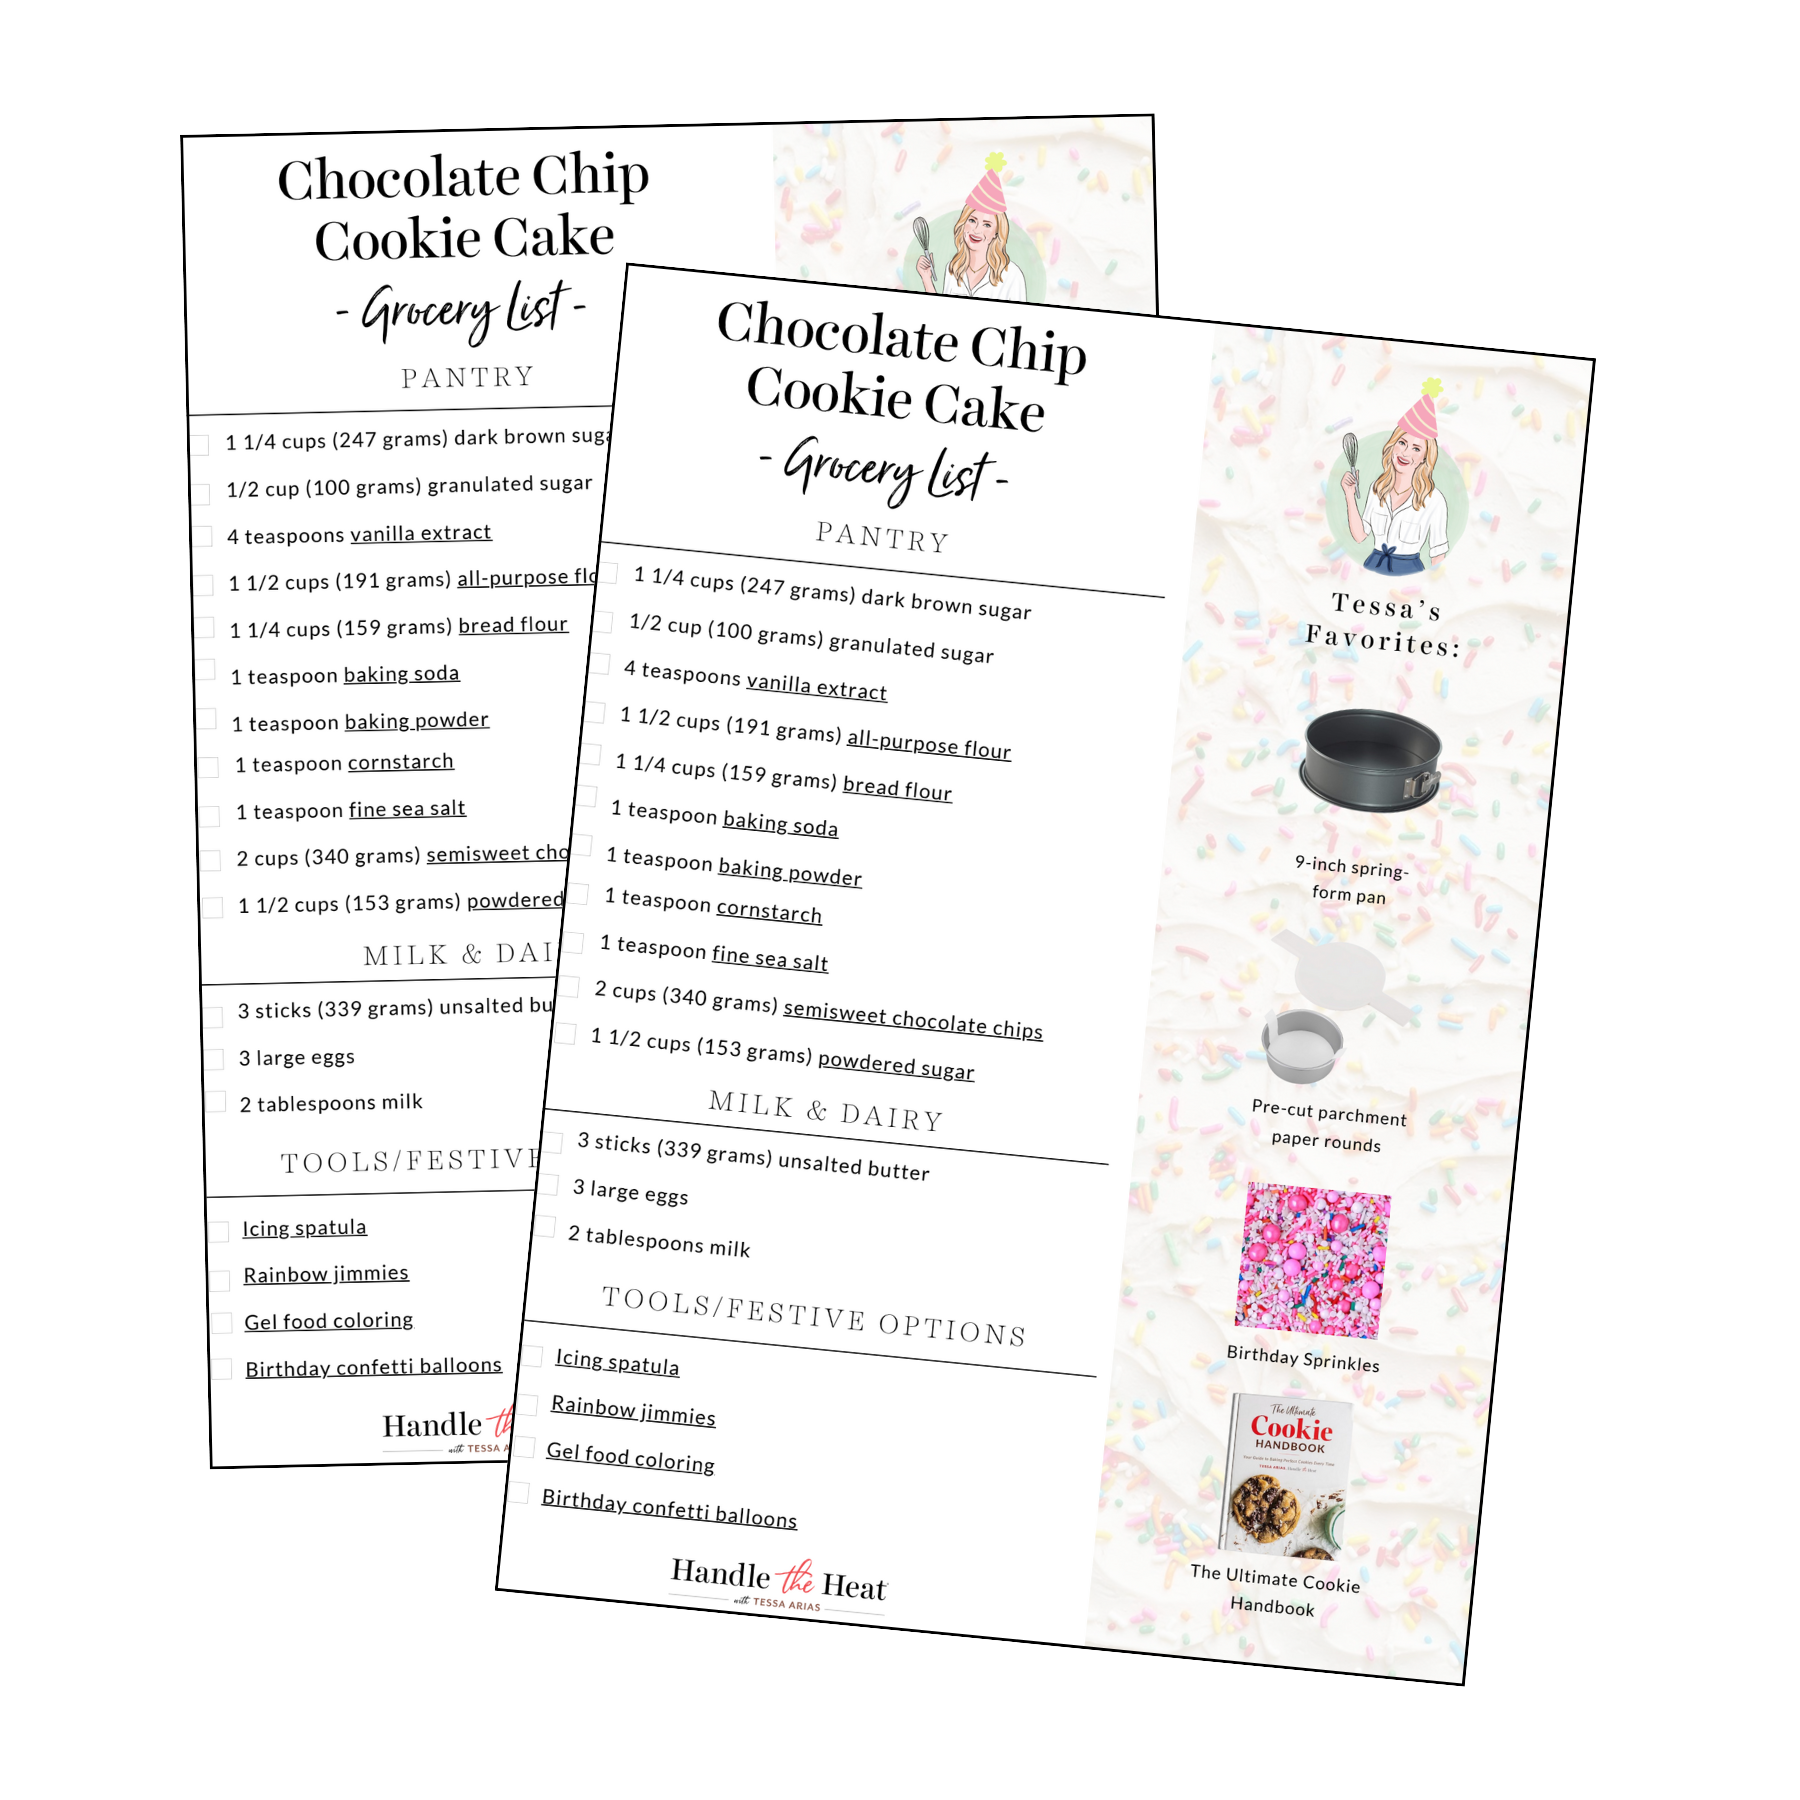 click here to download our free printable shopping list so you can easily buy your groceries for the monthly baking challenge.